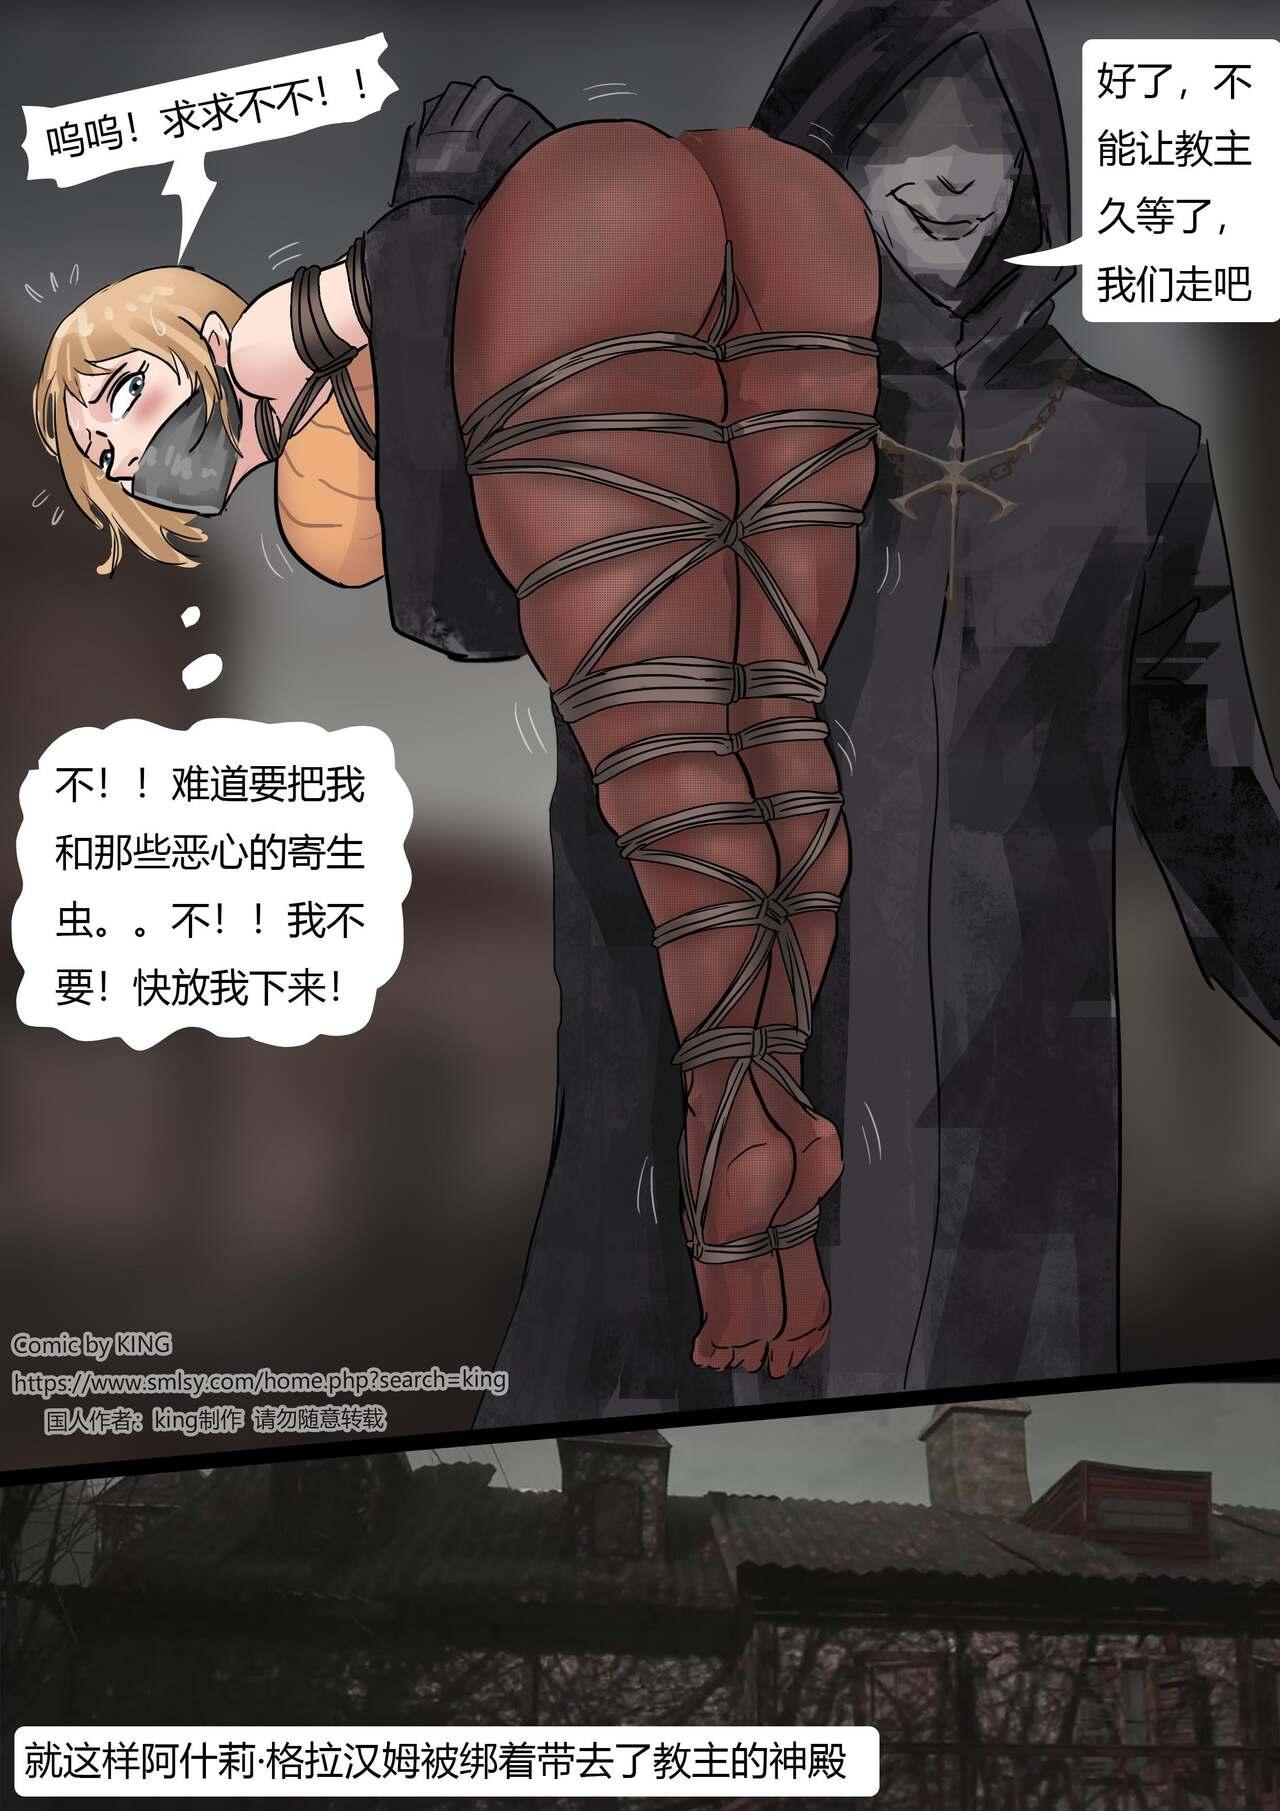 Shoes [King] Resident Evil 4 Remastered -- Two Beauties In Distress - Resident evil | biohazard  - Page 7